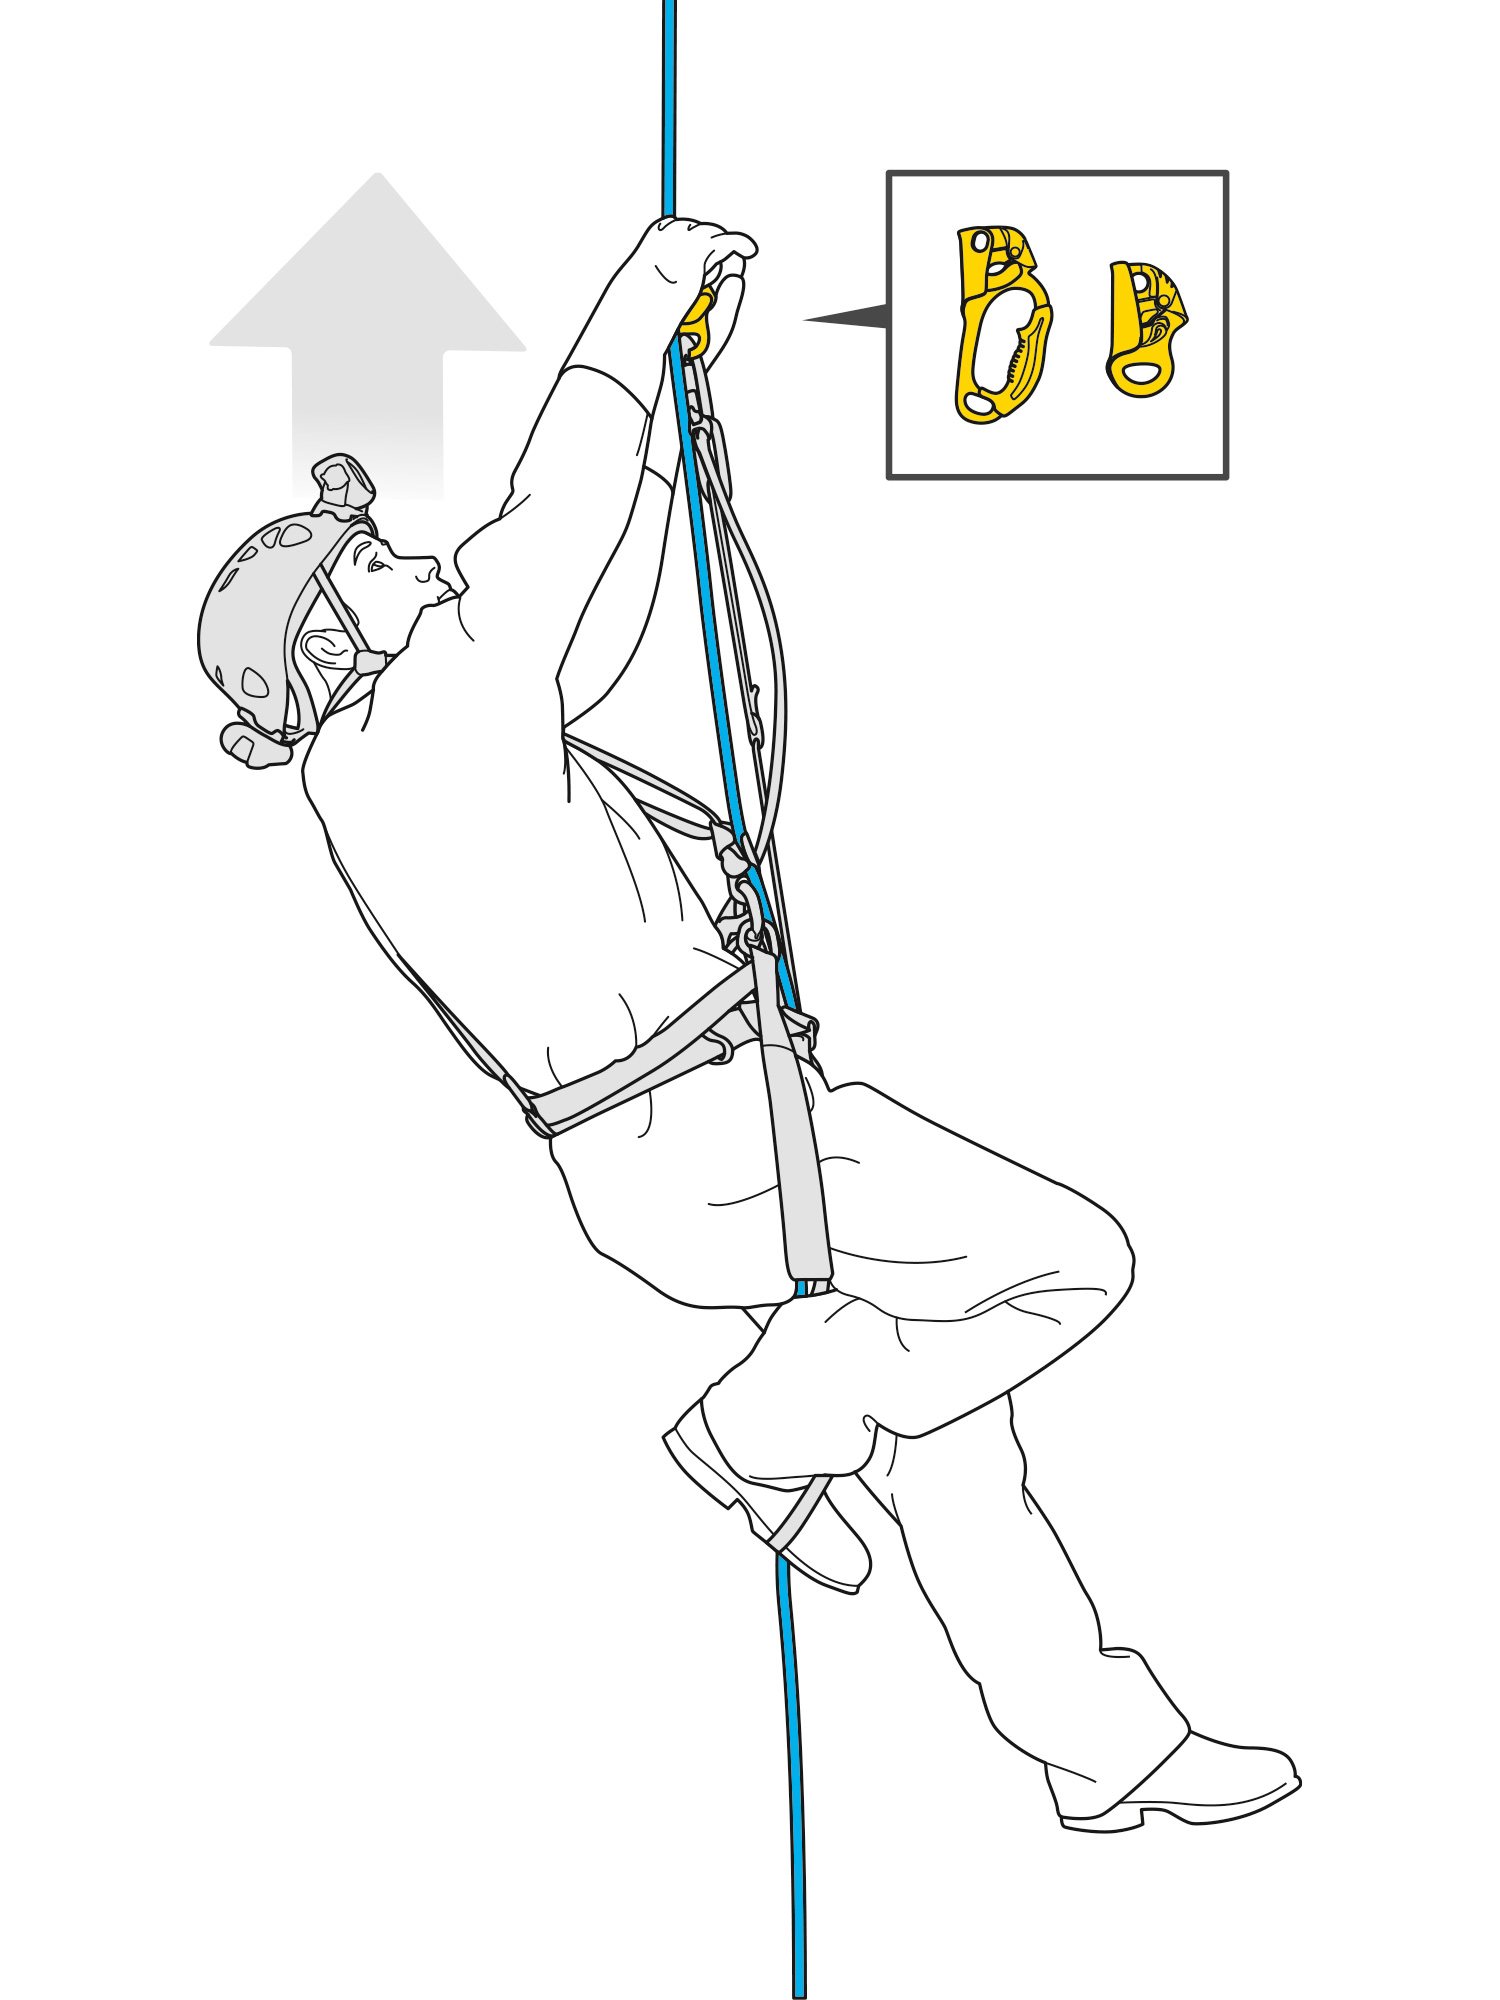 Rope ascent with hand ascender installed above the user.